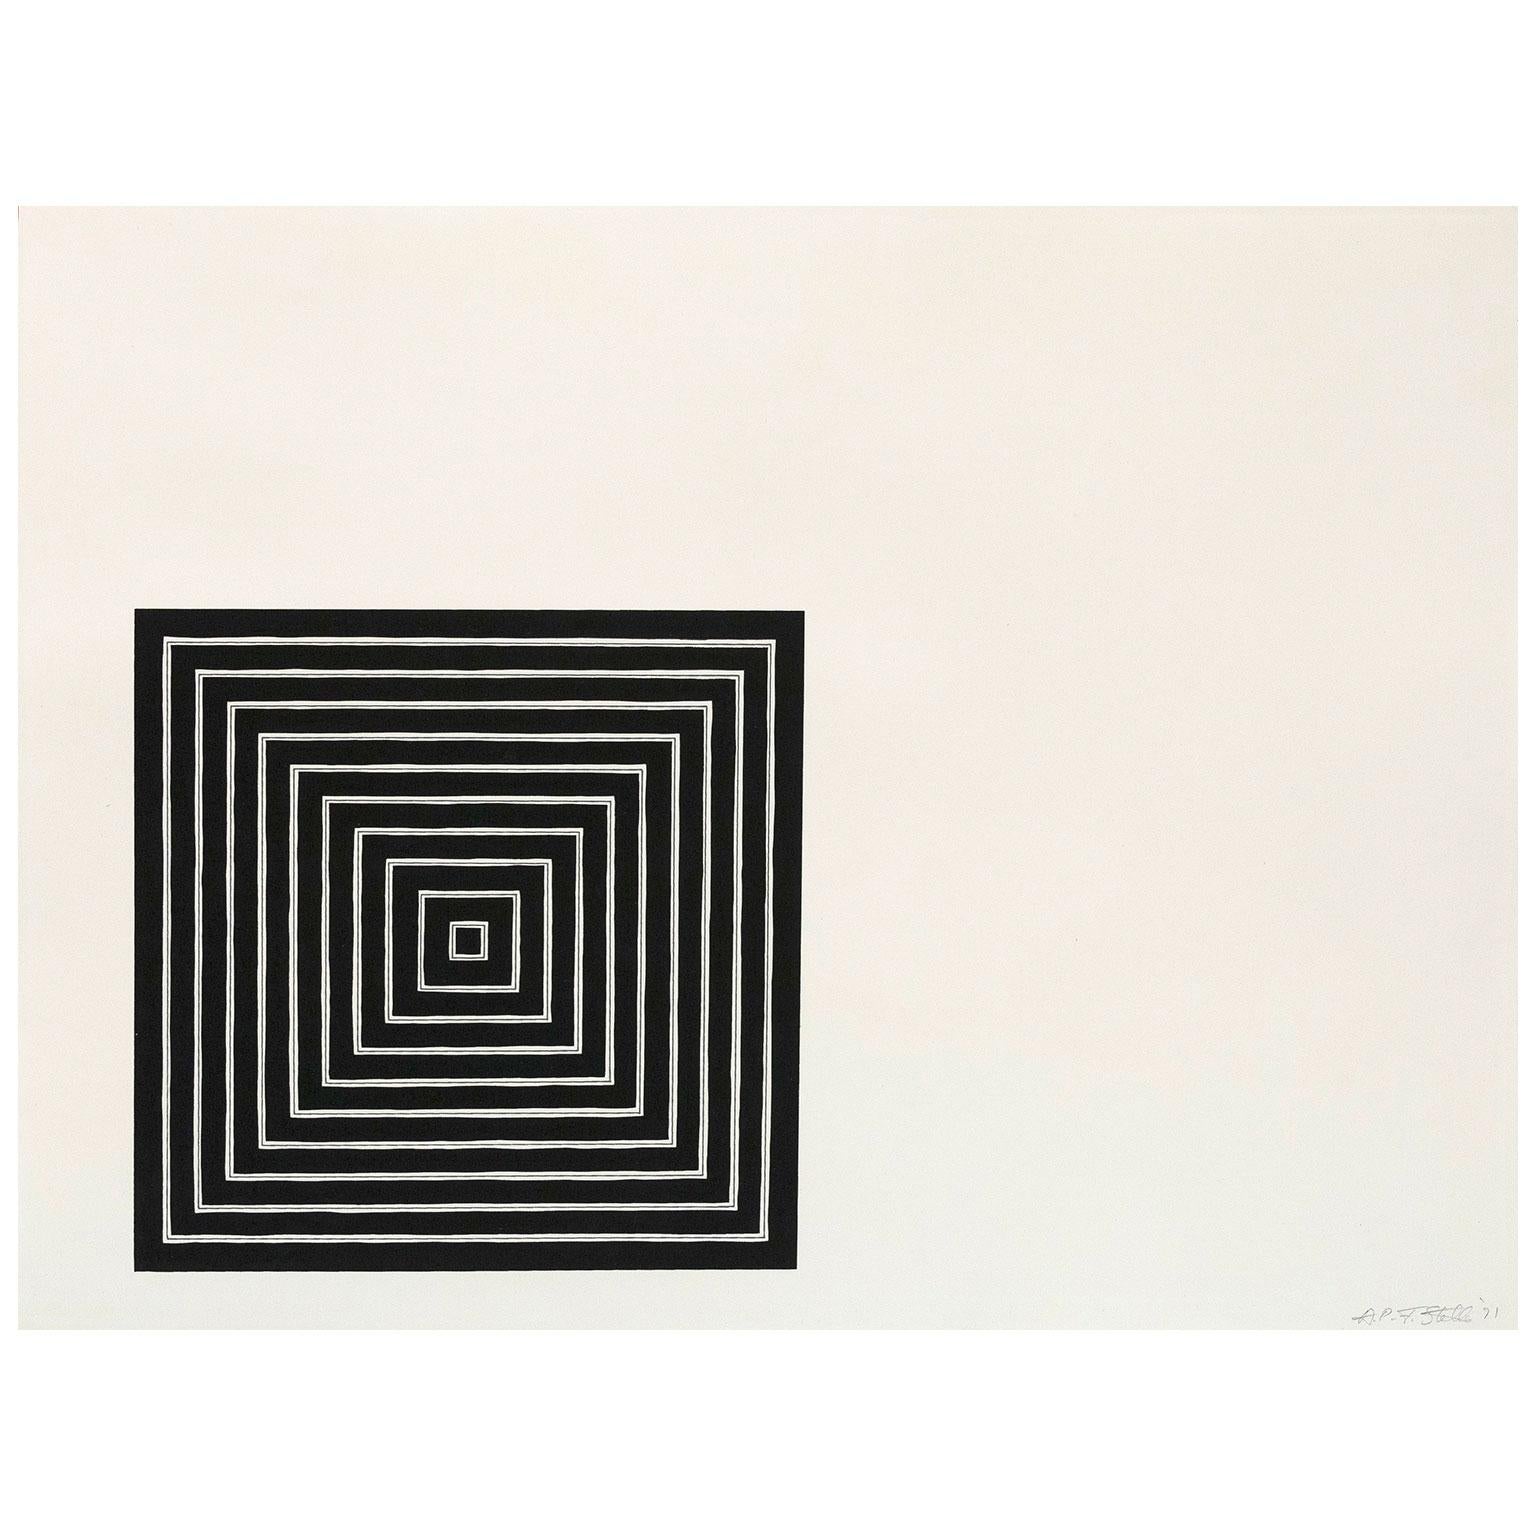 

Stella's work references many of the key developments or movements in post-war American painting; Op Art, hard-edge abstraction and Minimalism.

Stella was one of the first artists to dismiss the idea of using paint in an expressive form in the